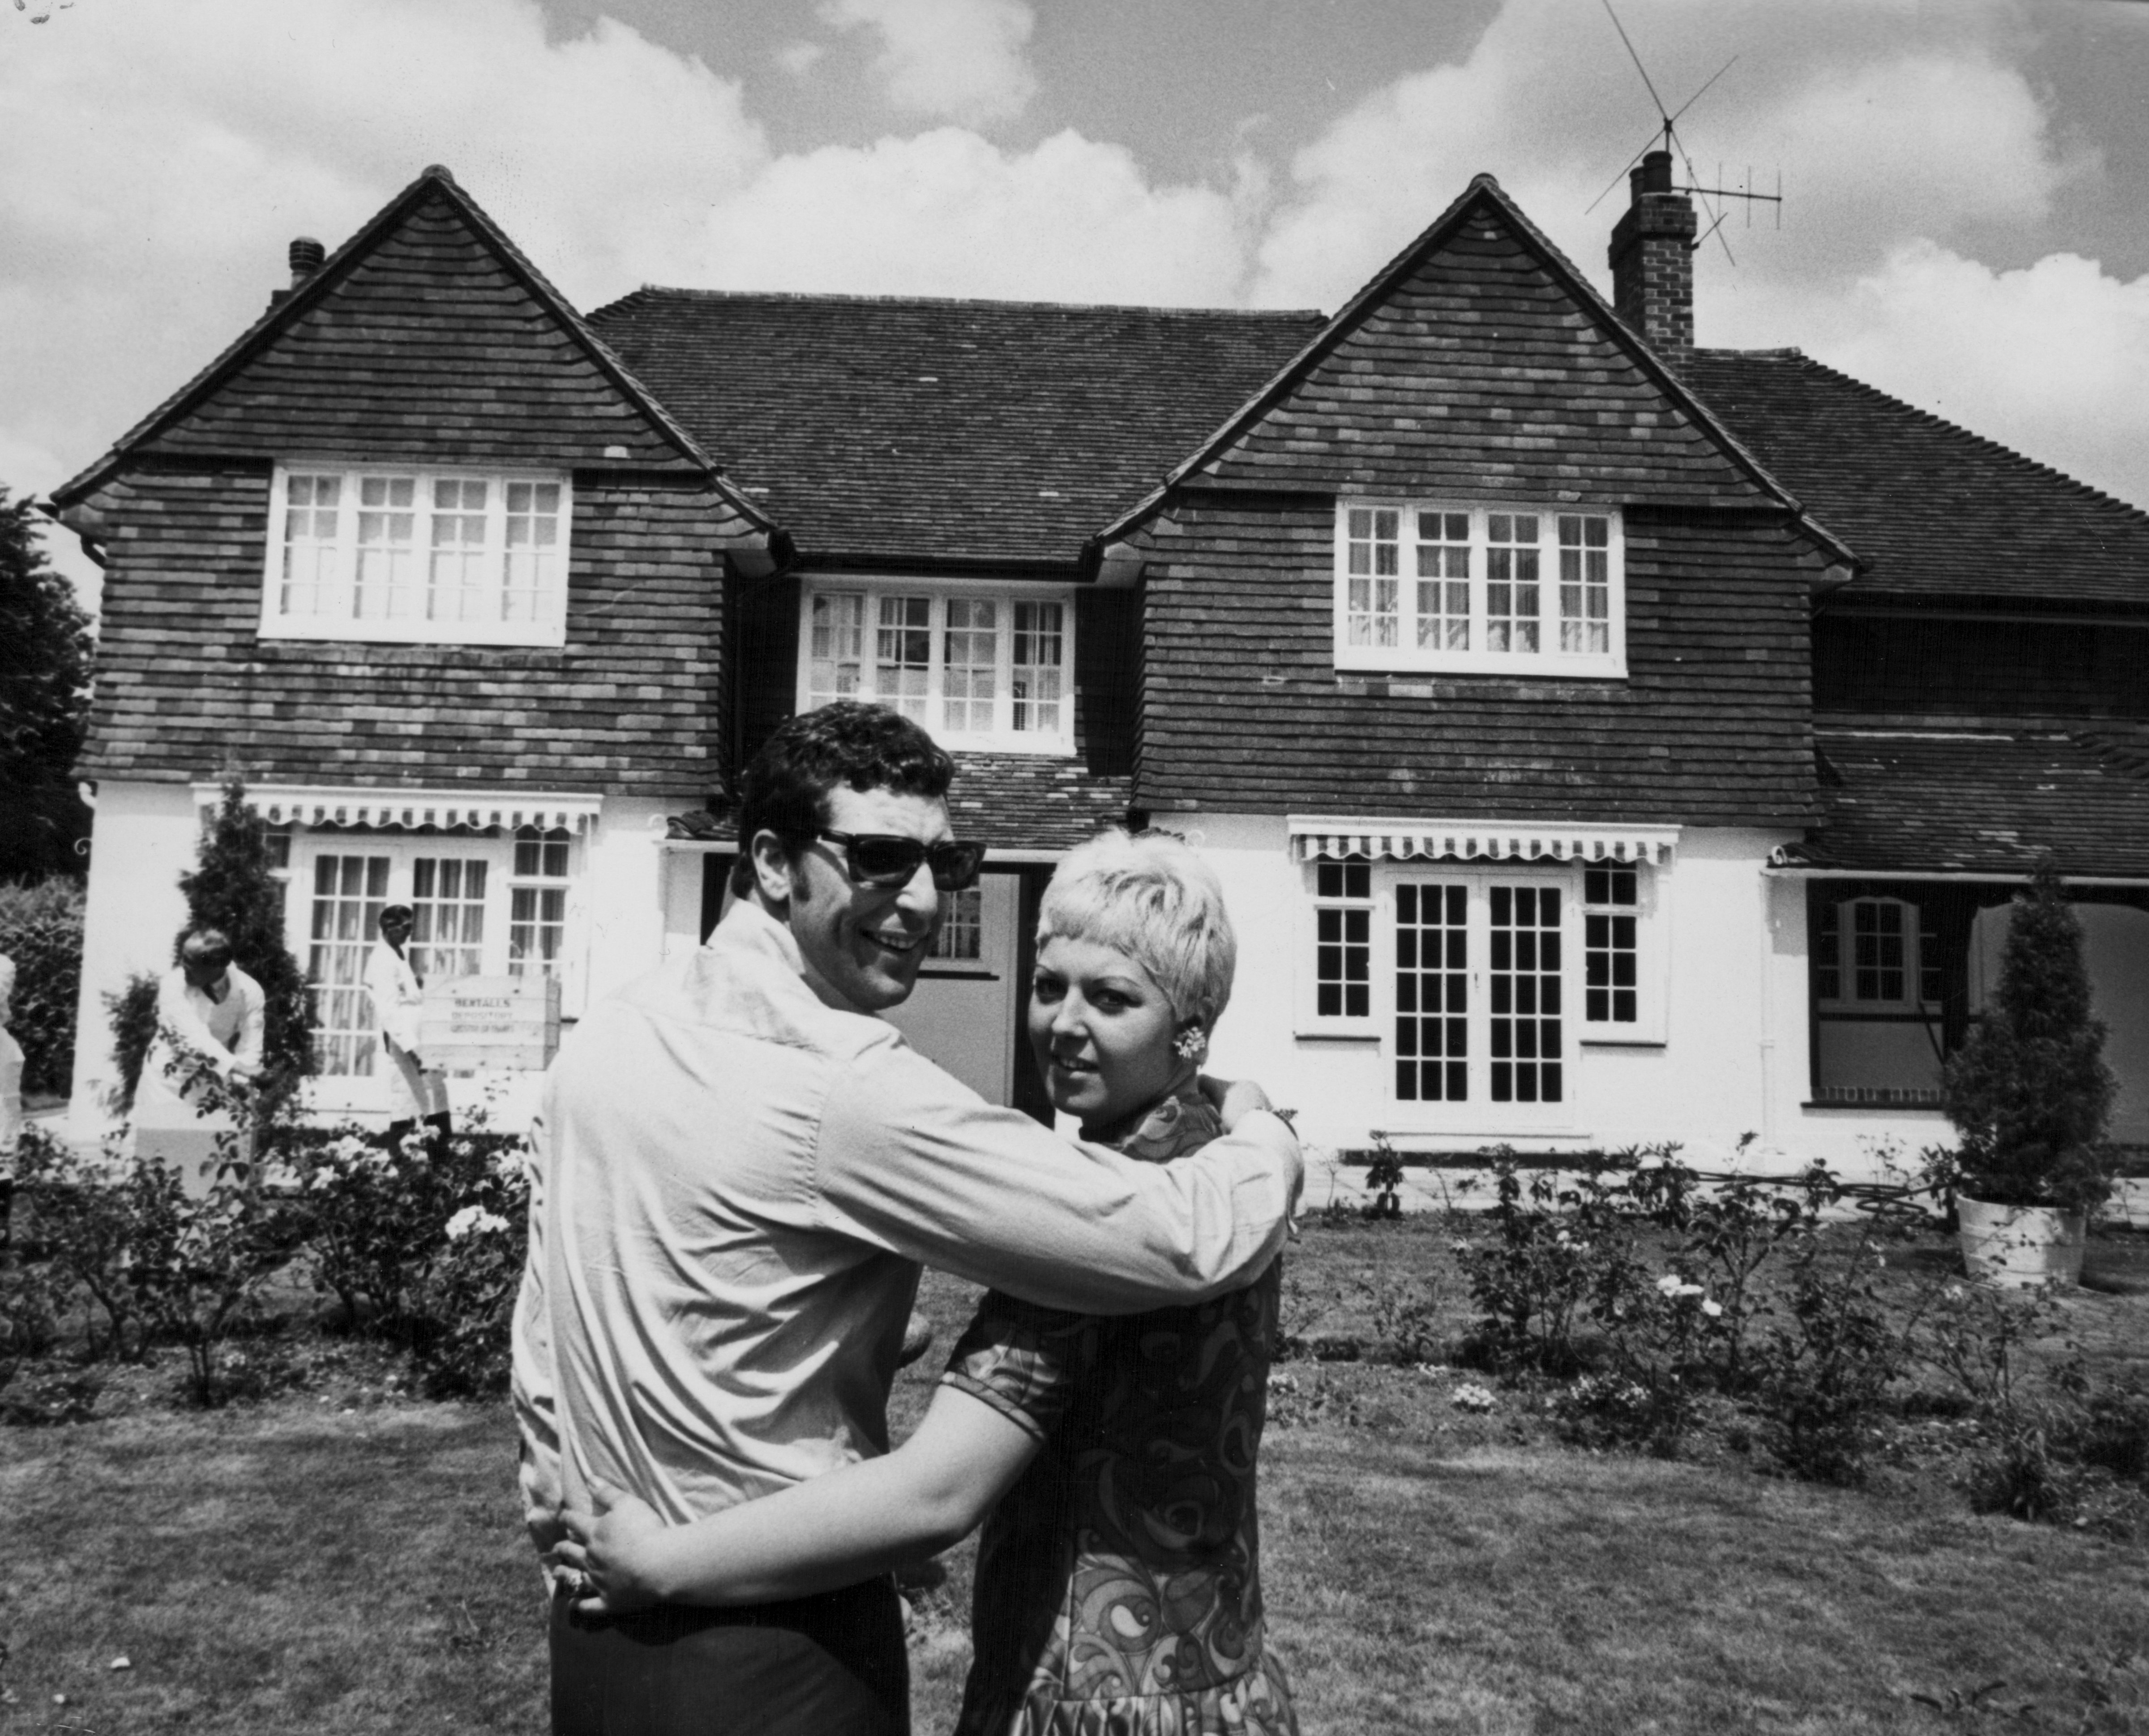 Tom Jones and Melinda Trenchard, posing outside their home on July 20, 1967 in Glamorgan, Wales. / Source: Getty Images